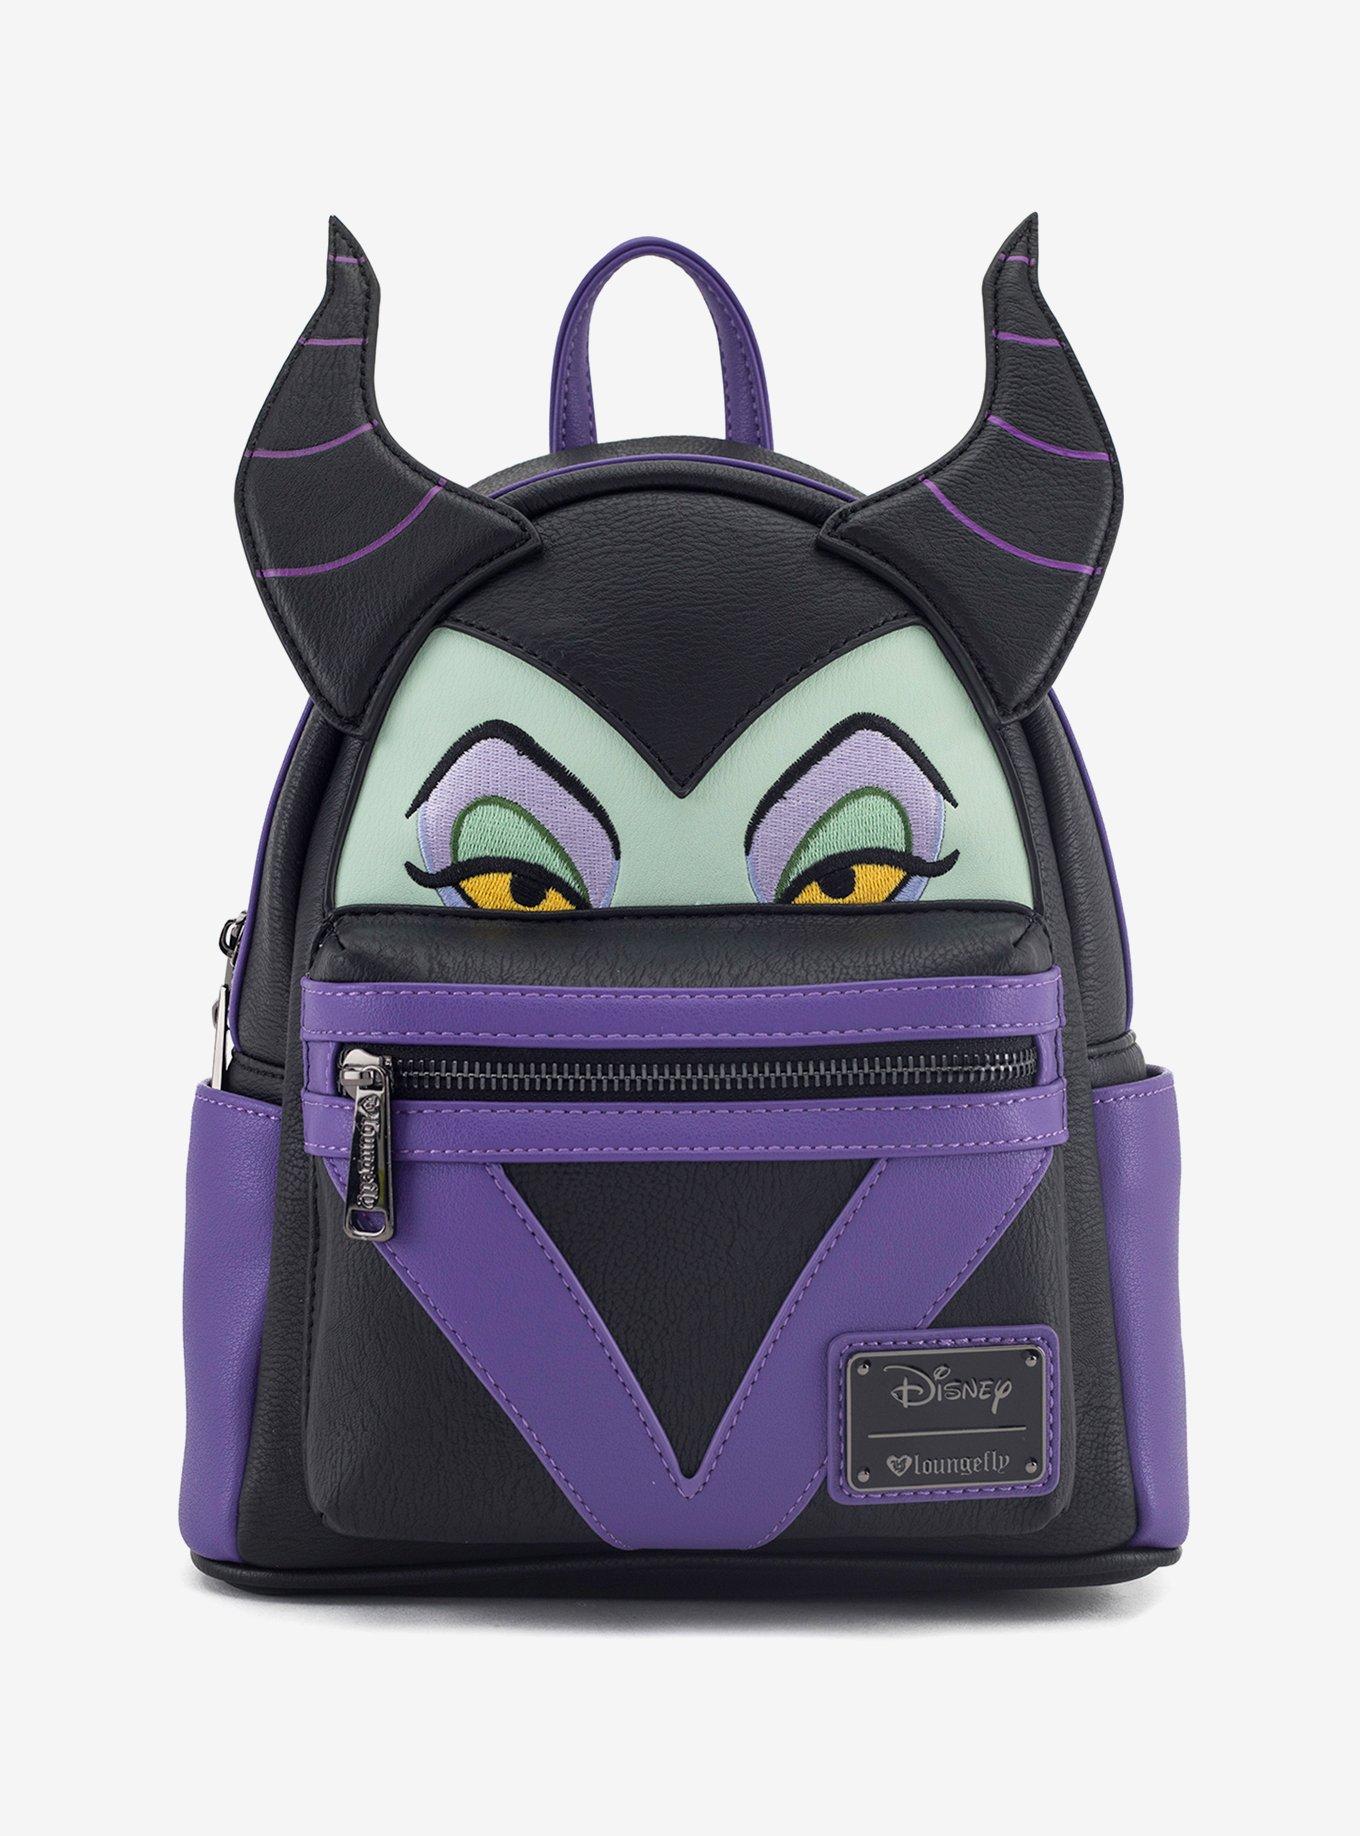 maleficent loungefly bag